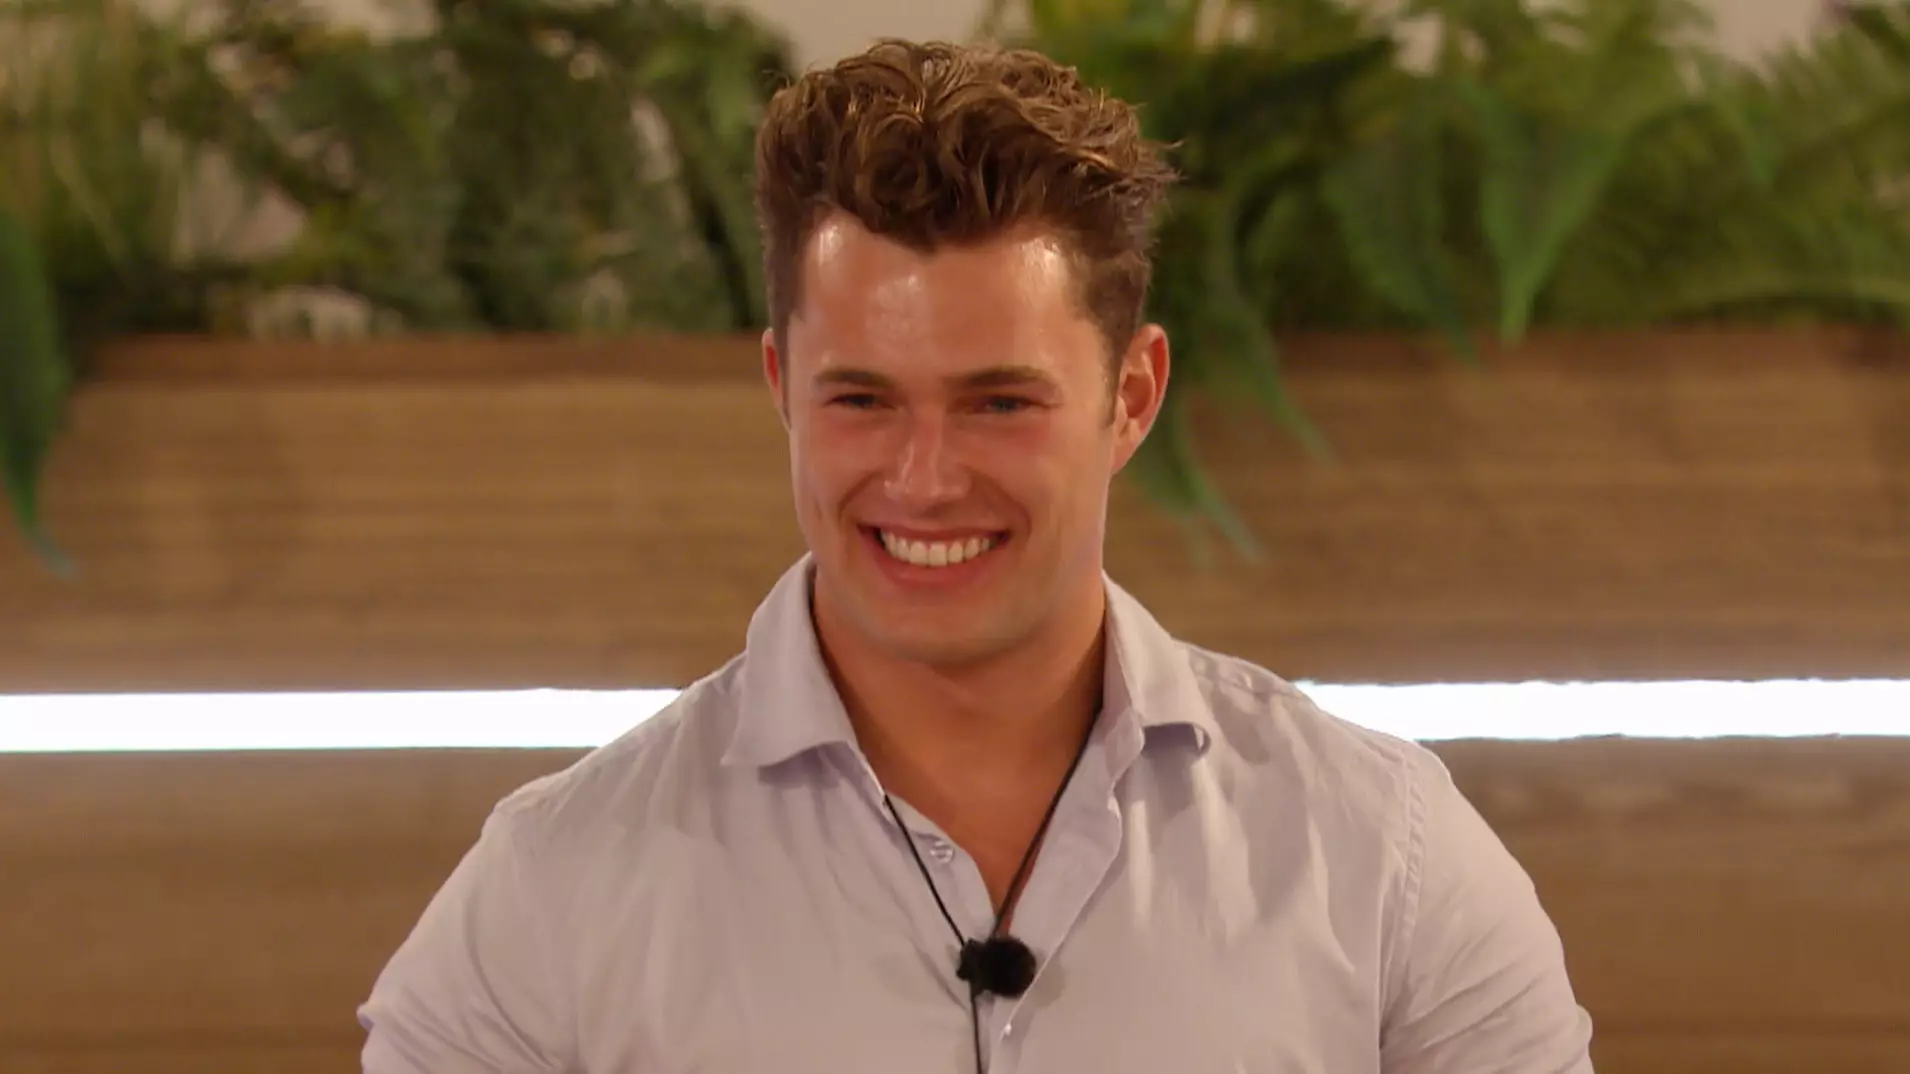 'Love Island’ Is A Bleak Reminder That The Grass Isn't Always Greener On The Other Side